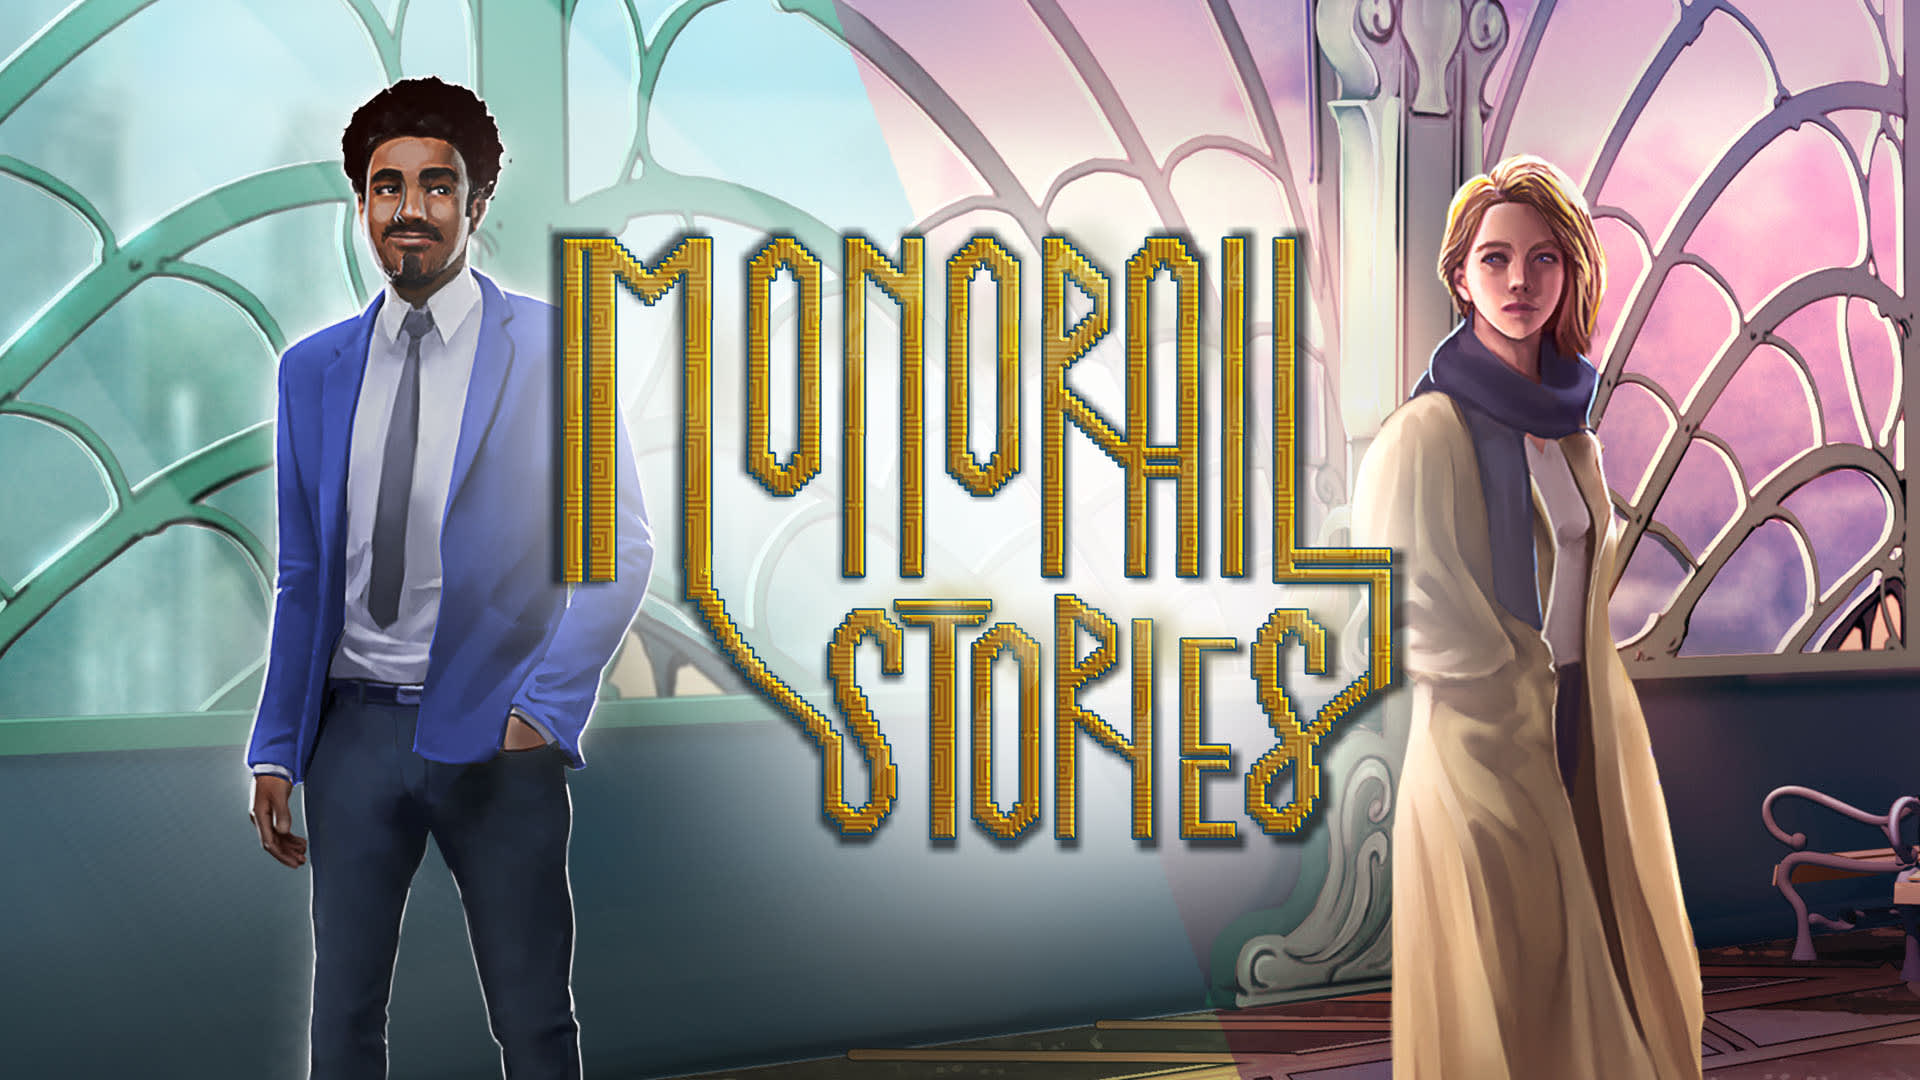 Monorail Stories 